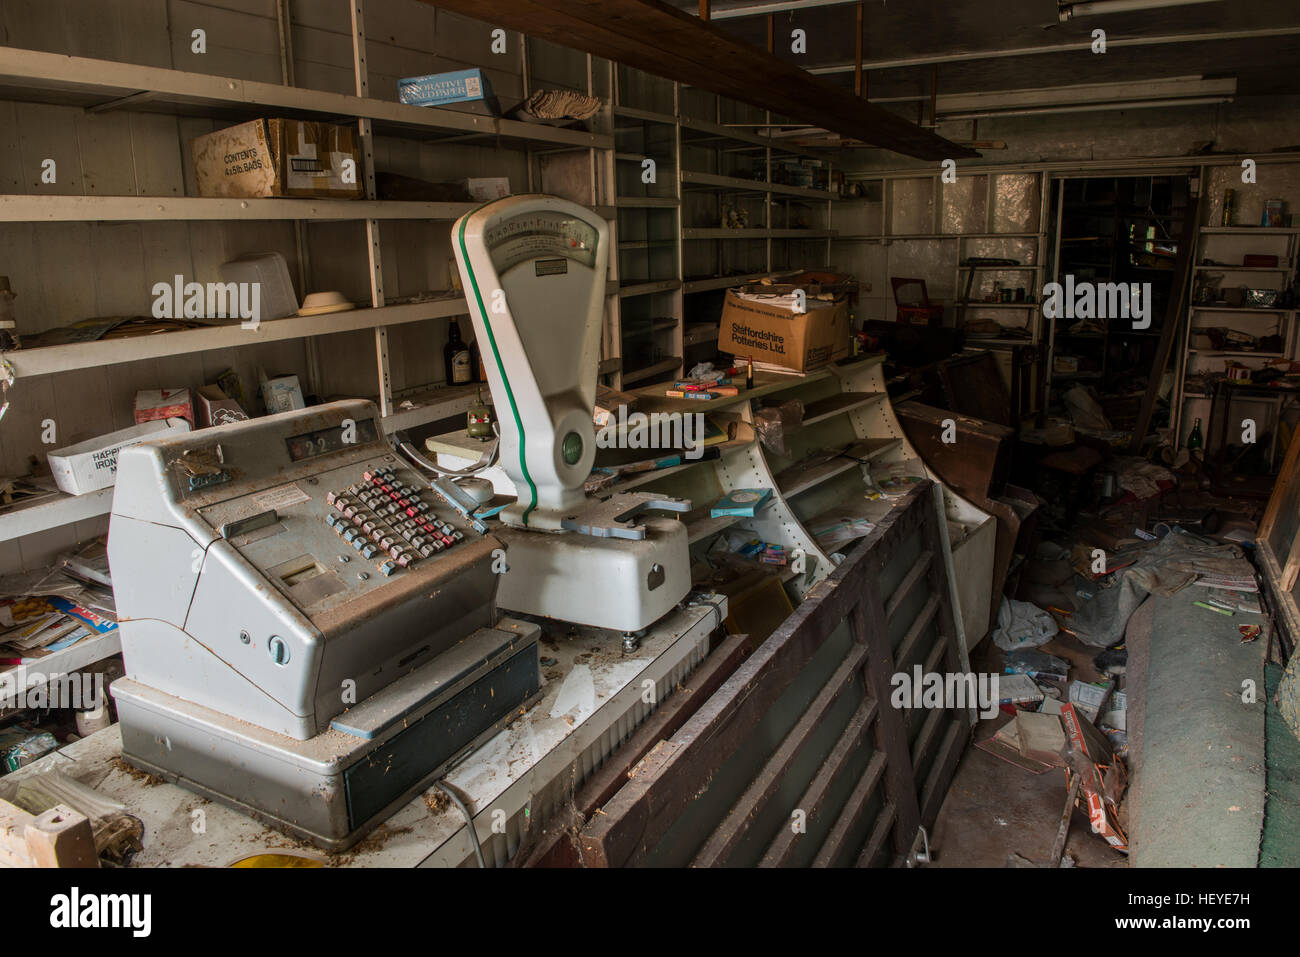 Inside a derelict/abandoned shop and residential premises within the village of Banham, Norfolk, UK Stock Photo